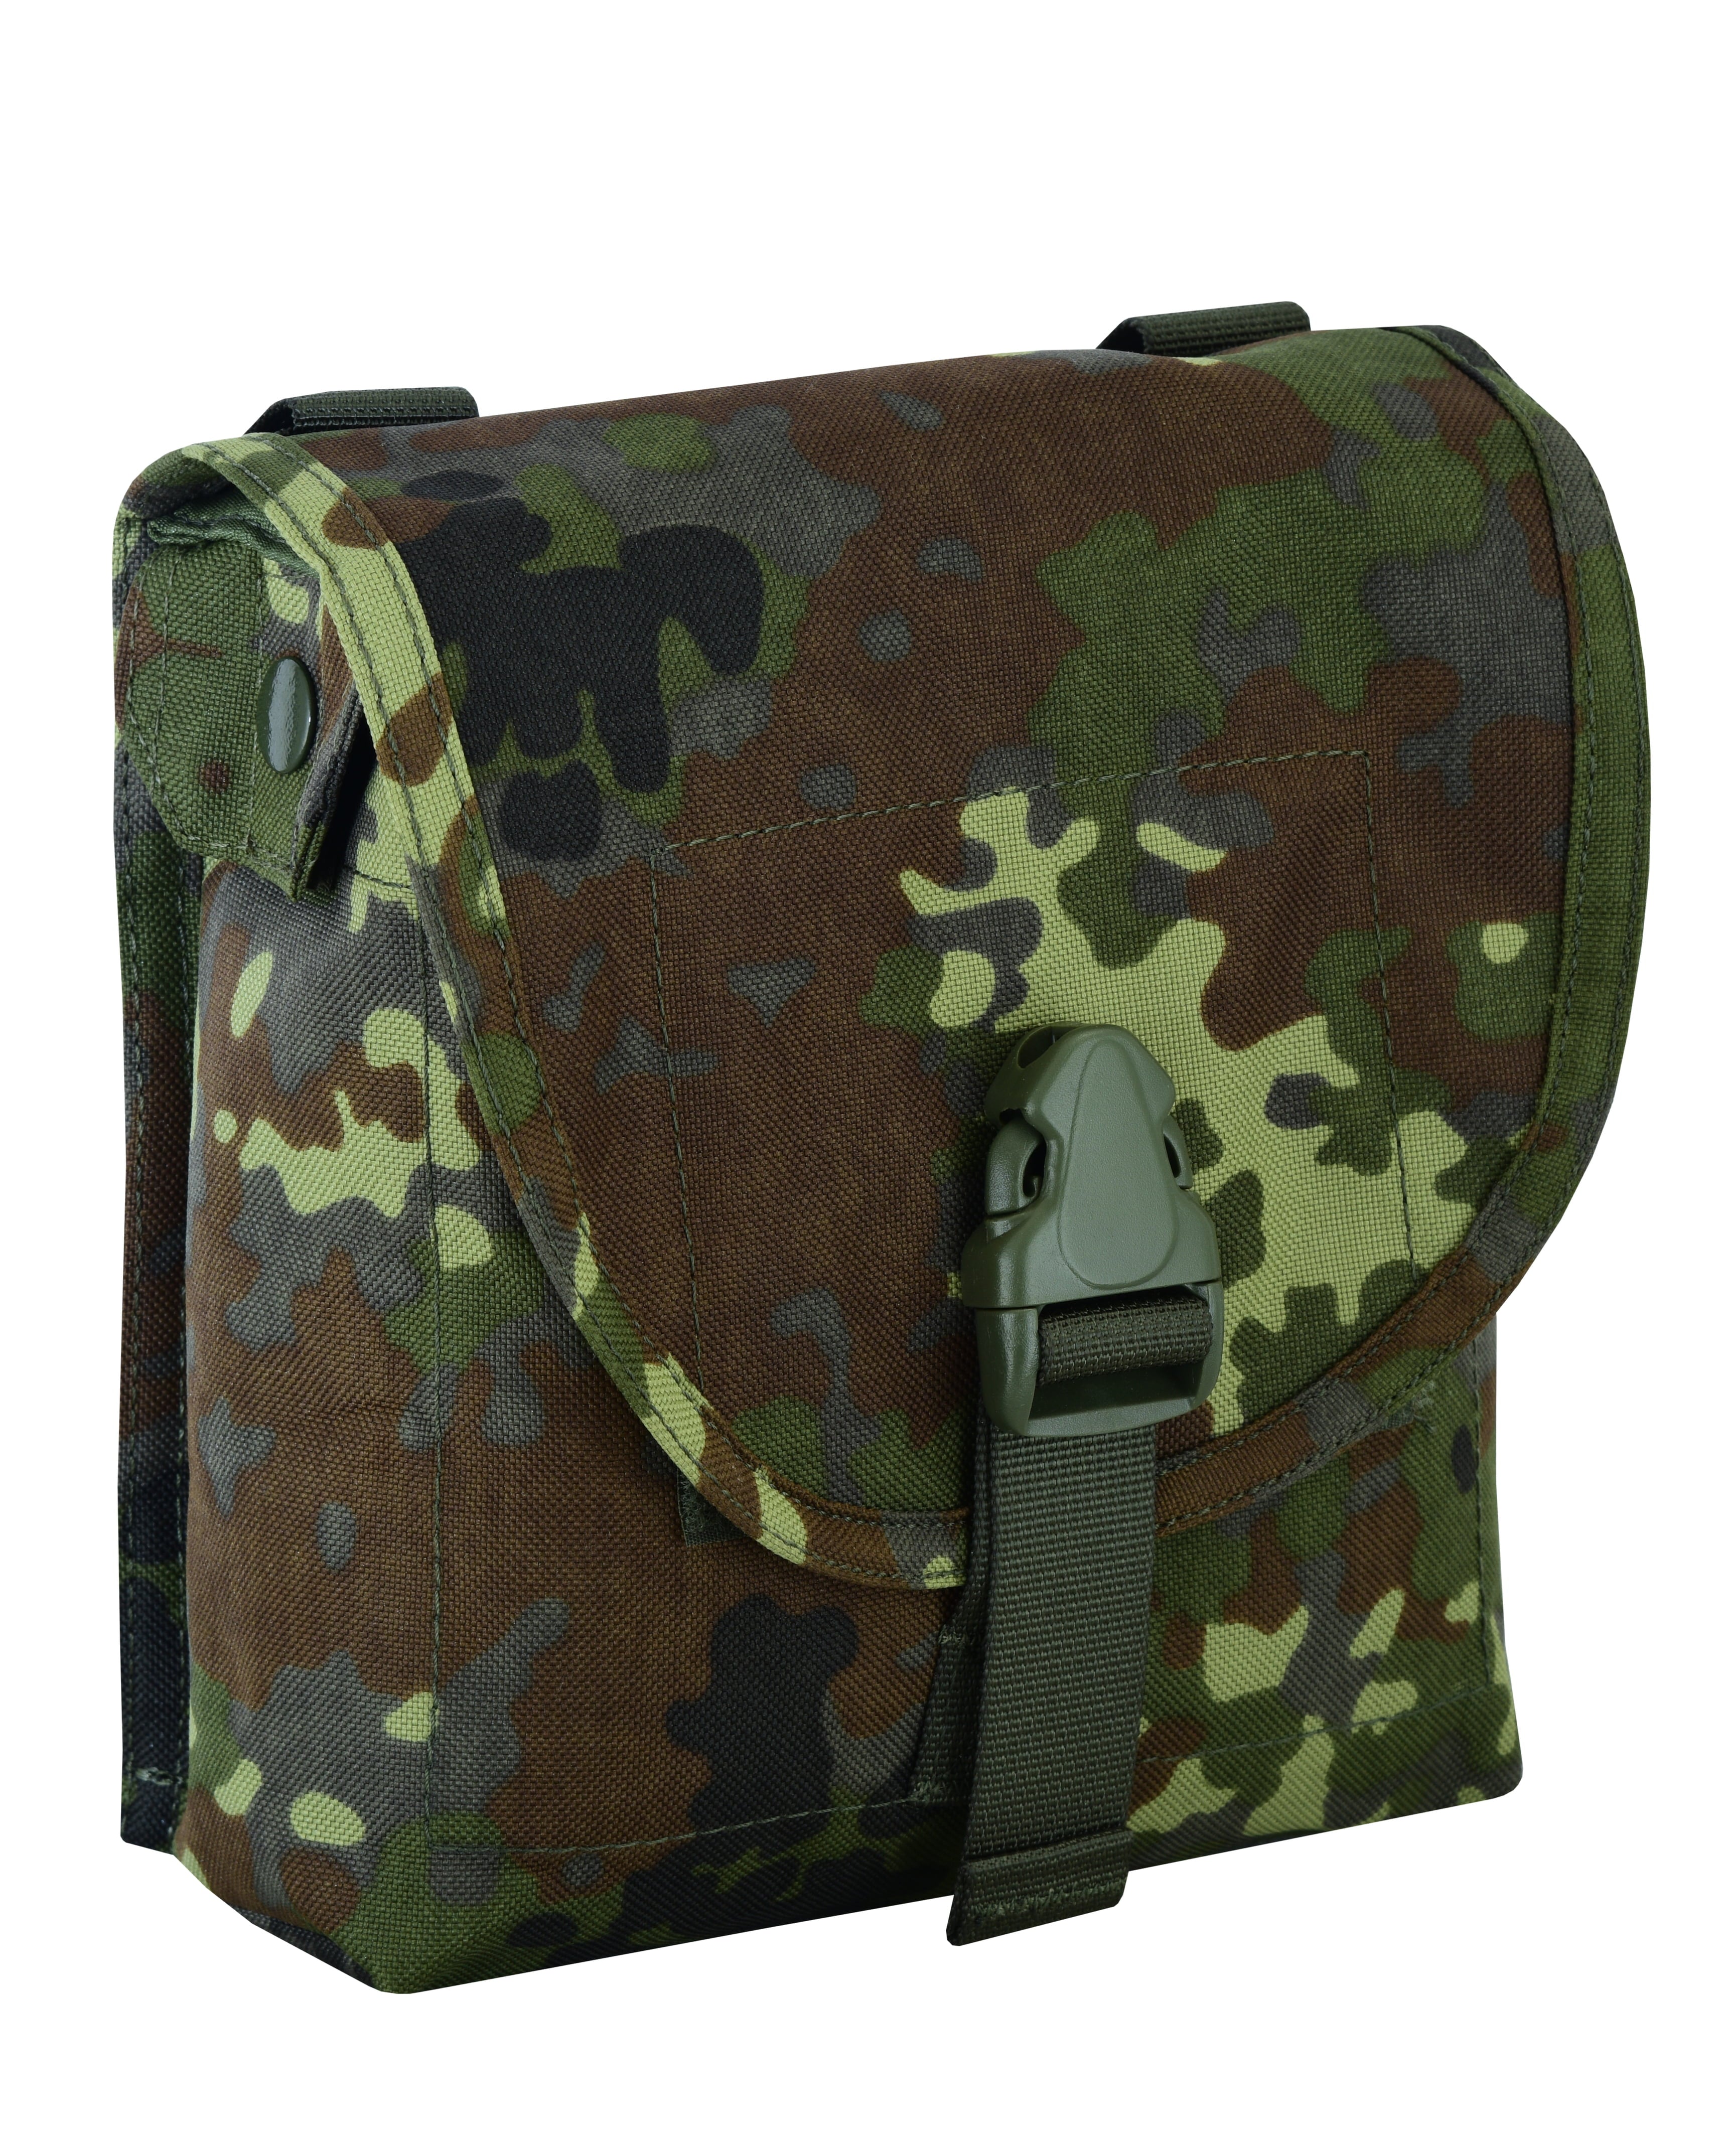 Shadow Strategic Camouflage LMG / SAW Pouch Color German flectarn side view.